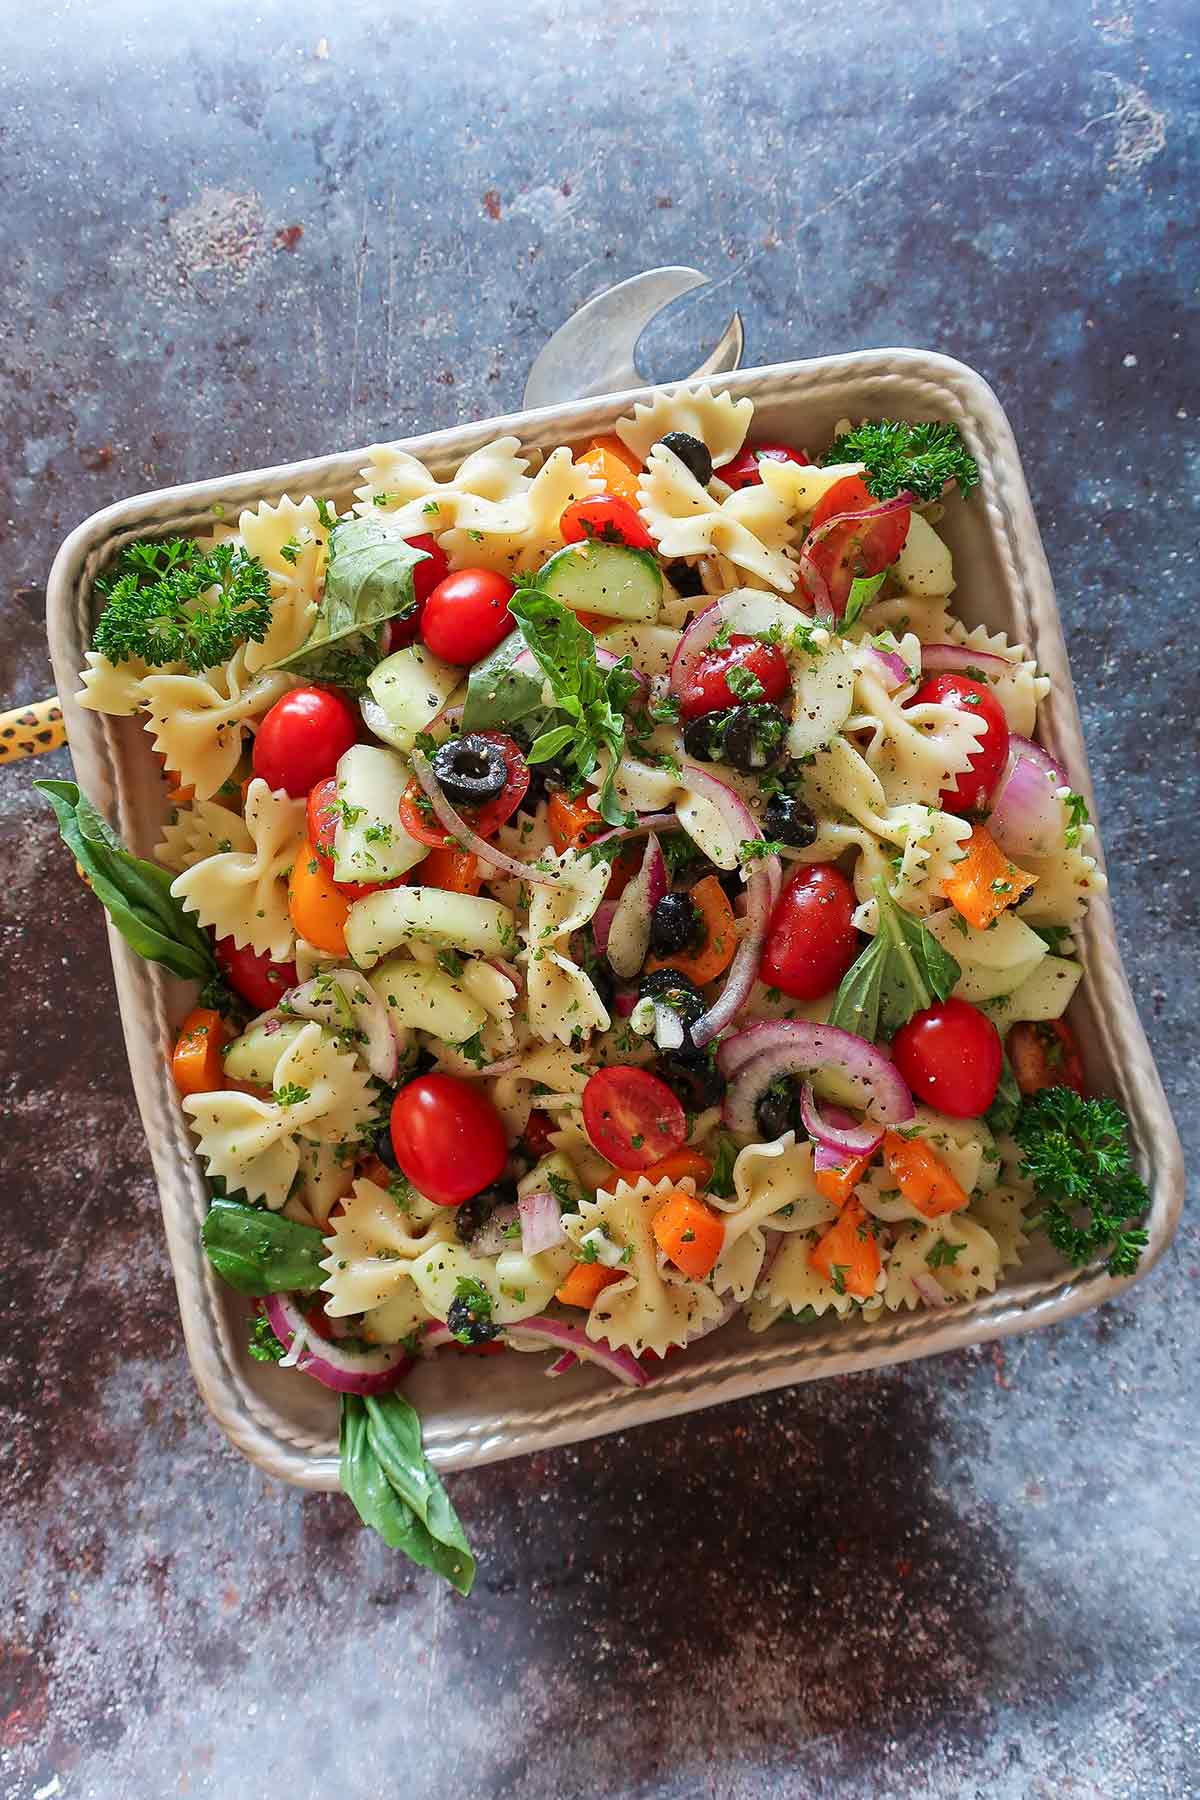 gluten free pasta, tomatoes, peppers, cucumber, olives, onions and herbs in a bowl